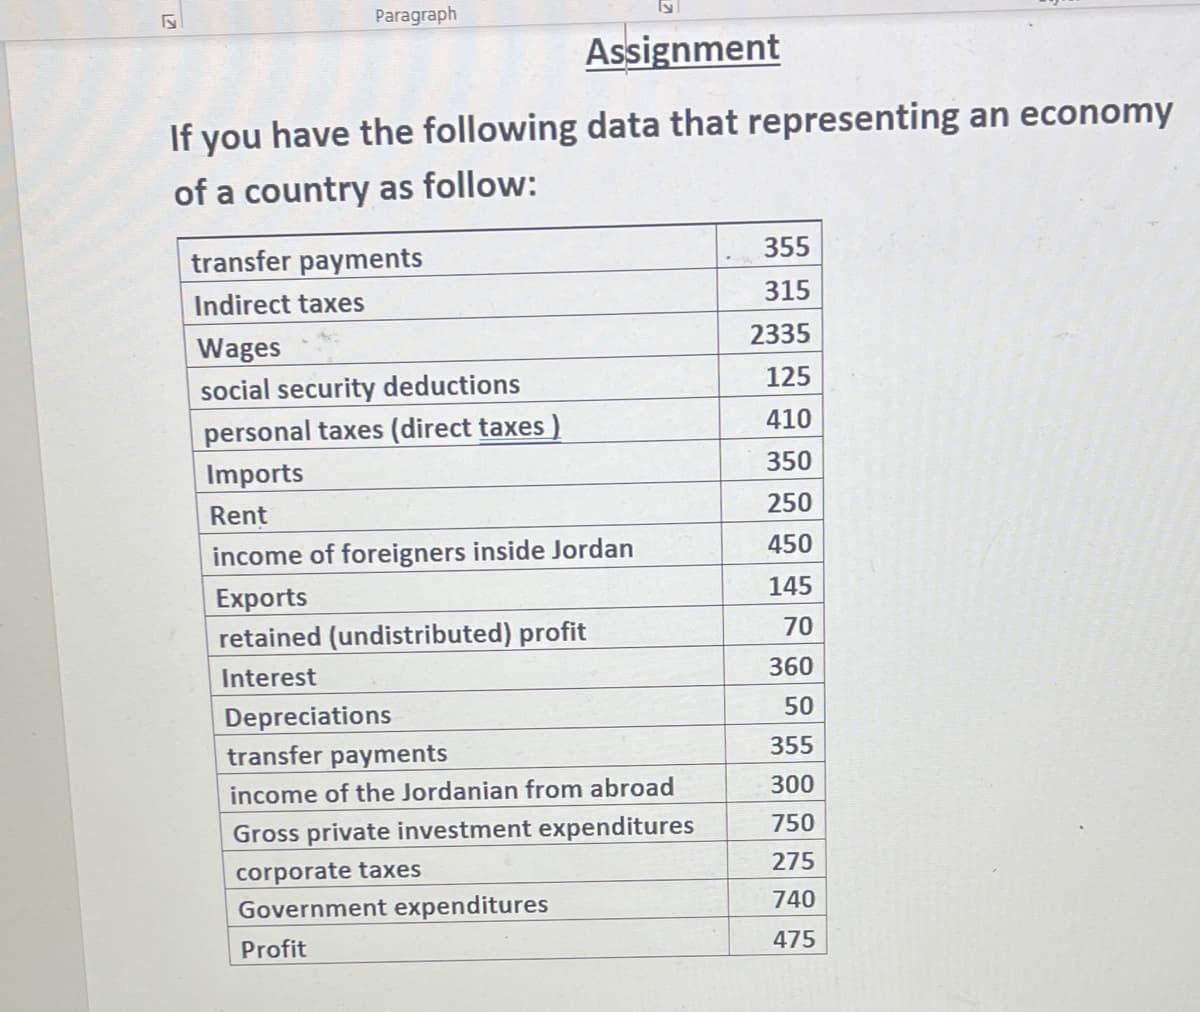 Paragraph
Assignment
If you have the following data that representing an economy
of a country as follow:
355
transfer payments
315
Indirect taxes
2335
Wages
125
social security deductions
410
personal taxes (direct taxes )
Imports
350
250
Rent
450
income of foreigners inside Jordan
145
Exports
retained (undistributed) profit
70
360
Interest
50
Depreciations
transfer payments
355
300
income of the Jordanian from abroad
750
Gross private investment expenditures
275
corporate taxes
740
Government expenditures
475
Profit
